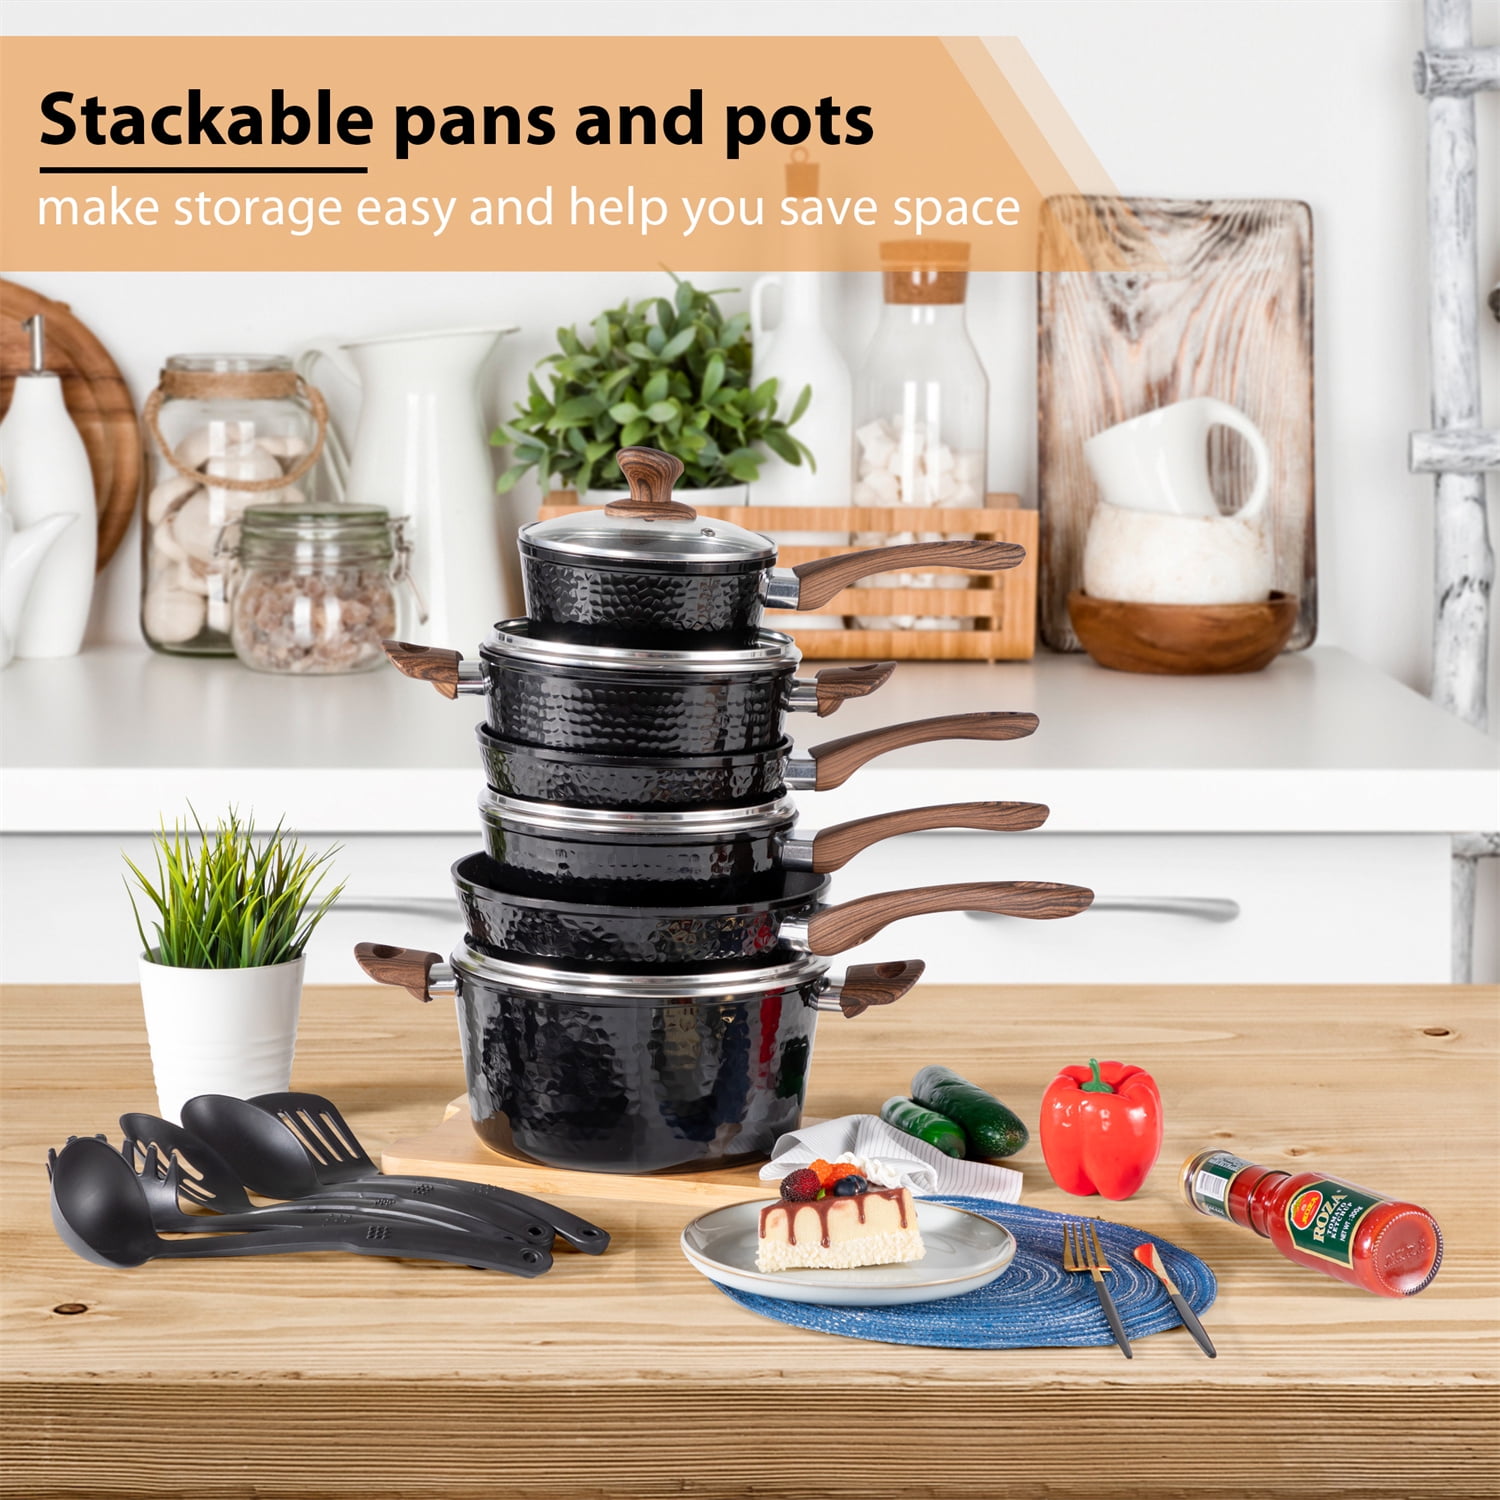 15 Piece Hammered Cookware Set Nonstick Granite Coated Pots and Pans Set